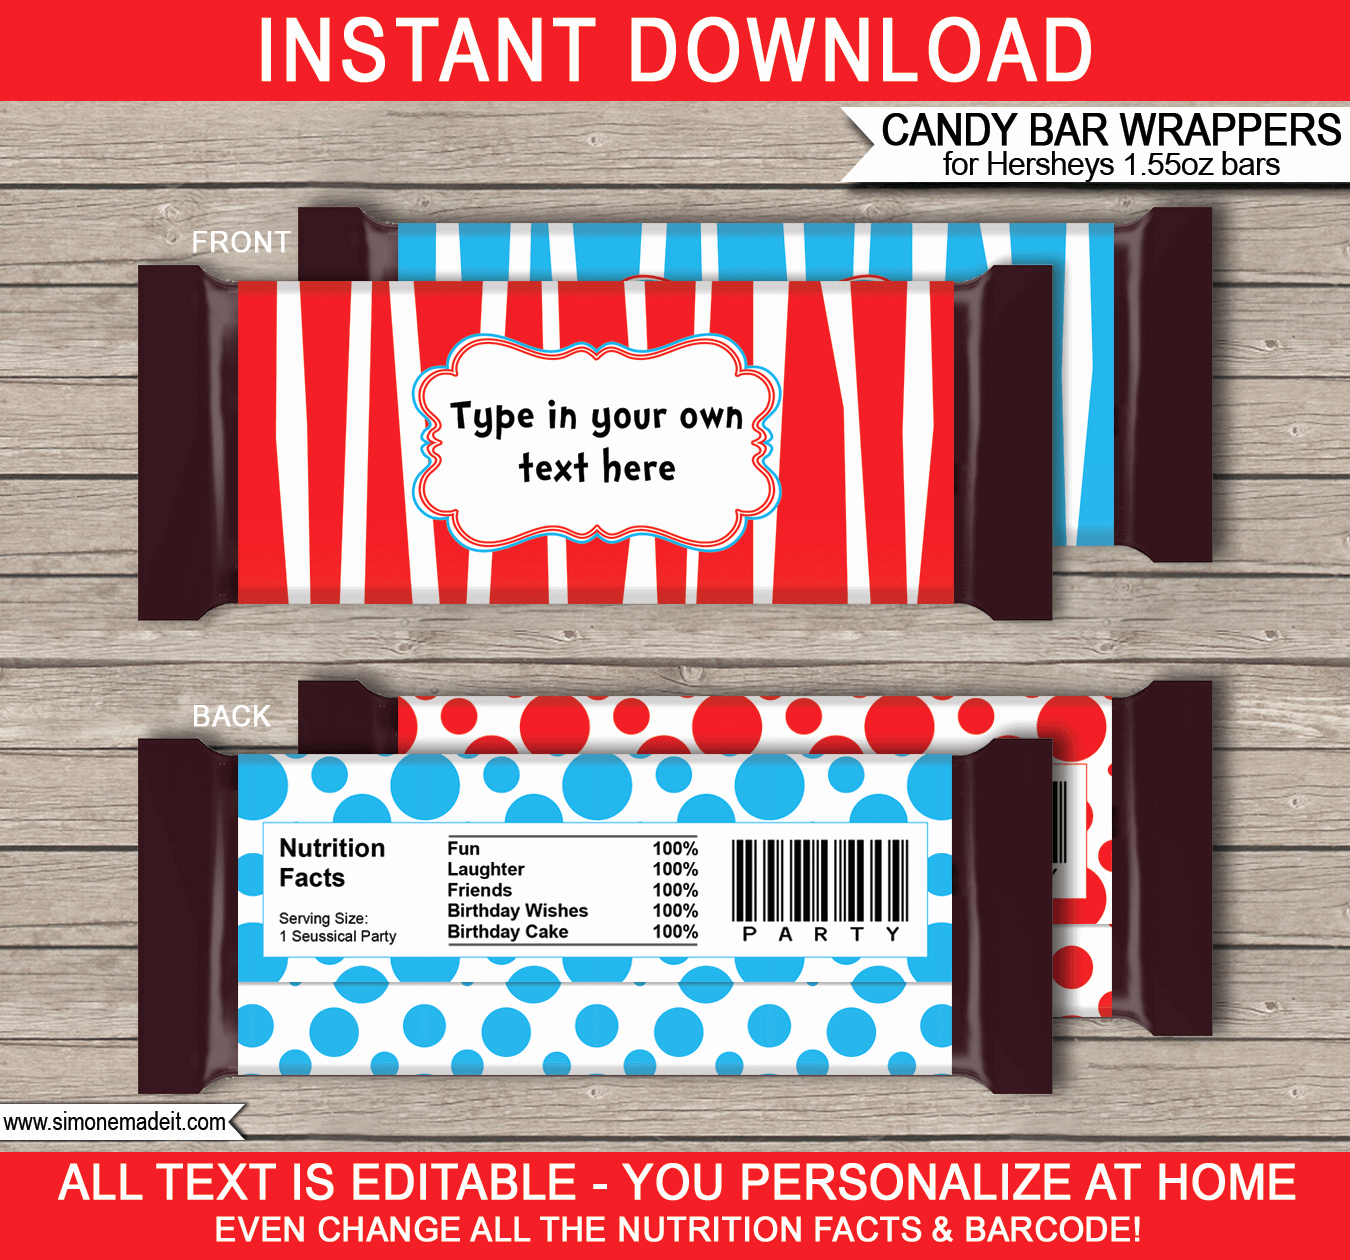 Hershey Candy Wrapper Template Inspirational Dr Seuss Hershey Candy Bar Wrappers